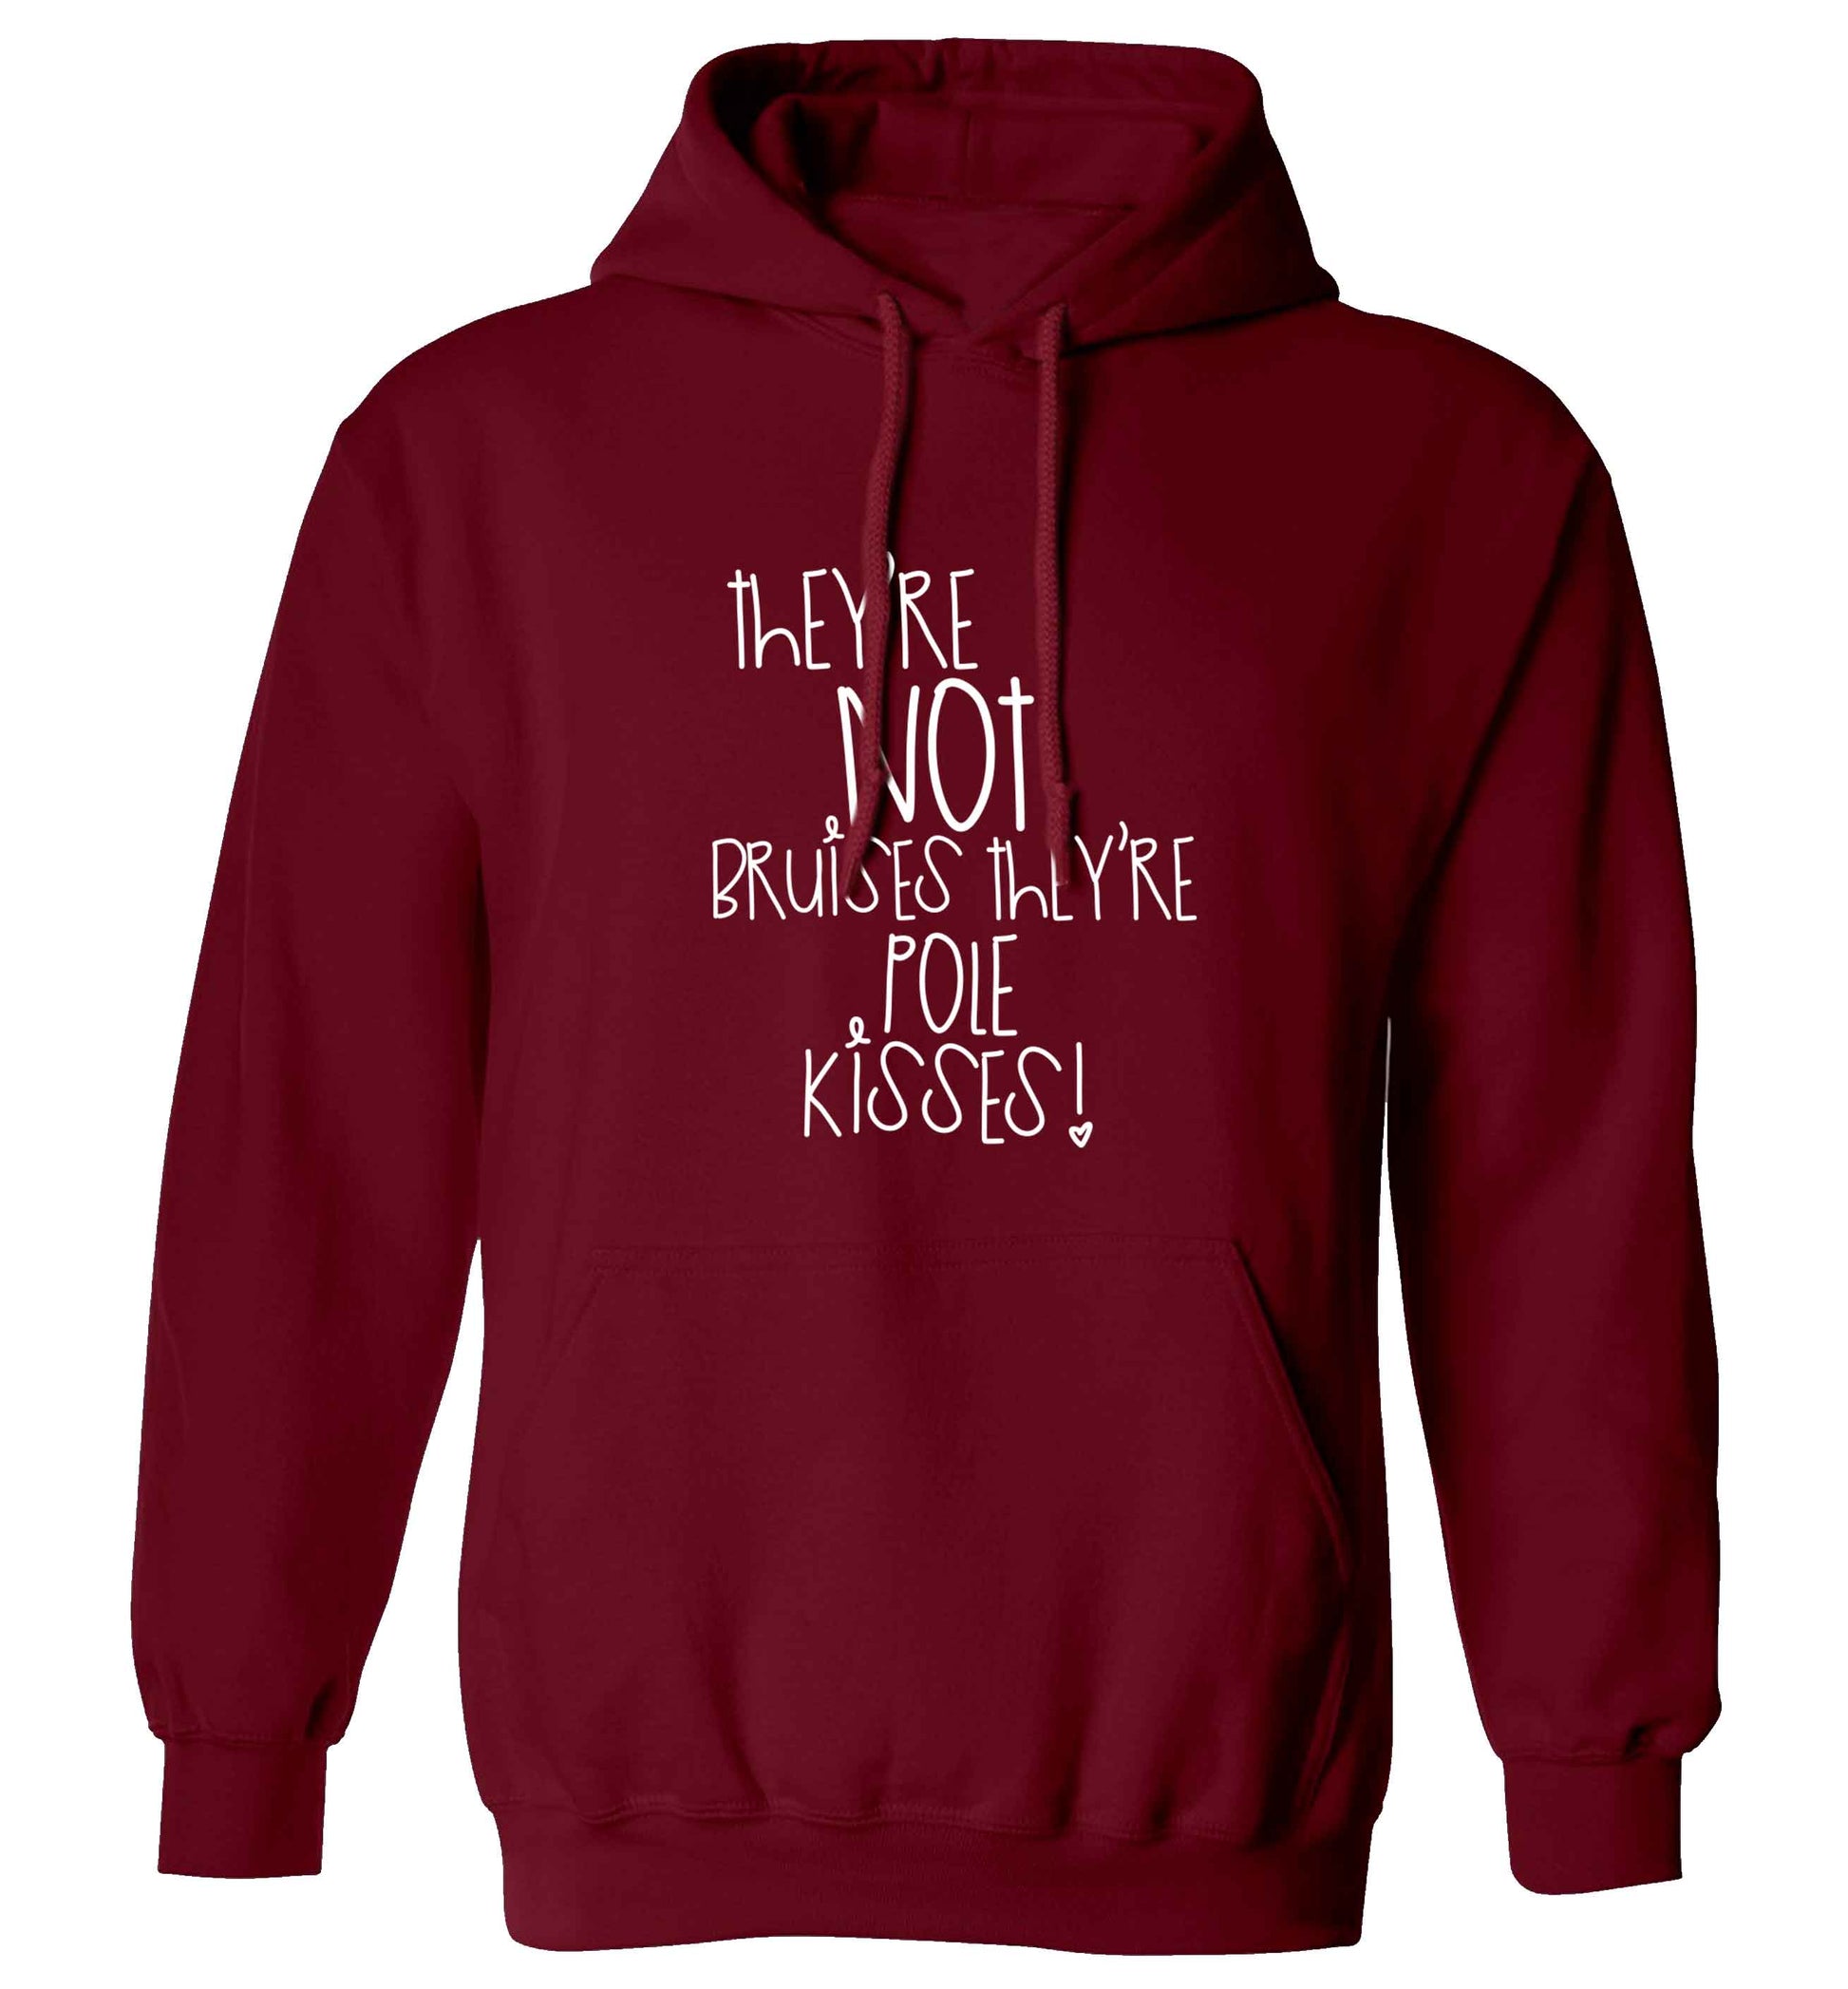 They're not bruises they're pole kisses adults unisex maroon hoodie 2XL